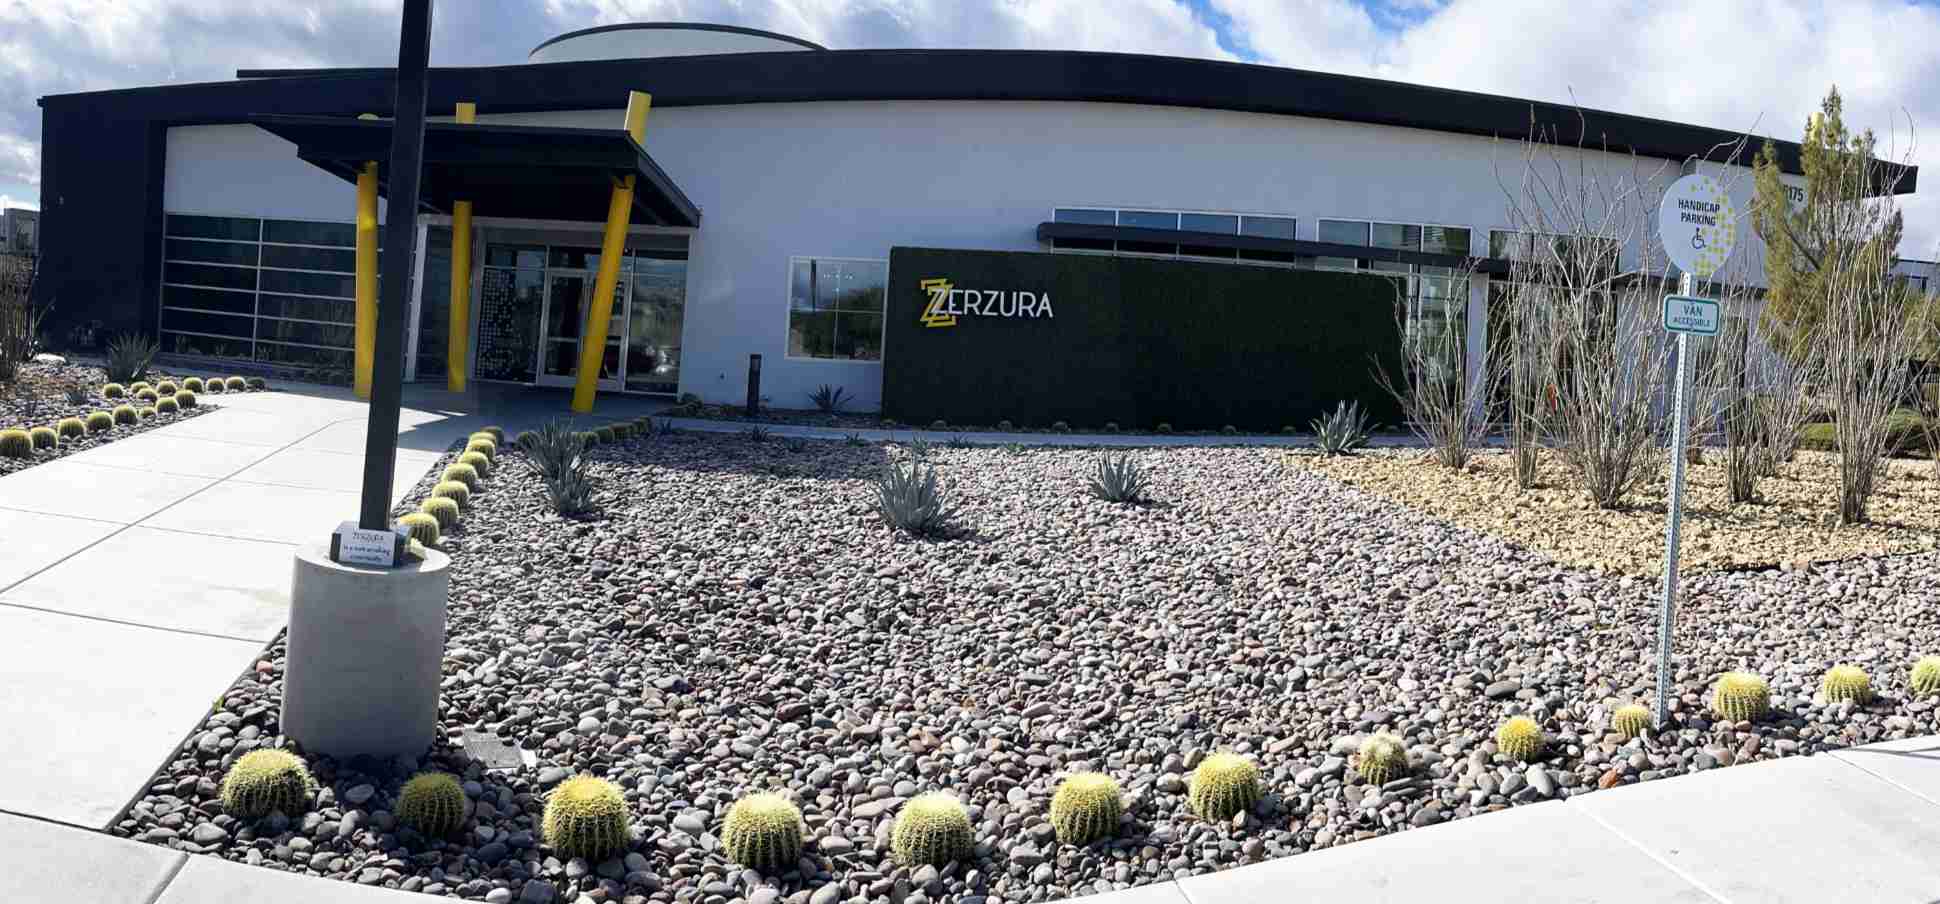 front of apartment building with na,me zerzura on it with rocks and some porcupine cactus style landscaping